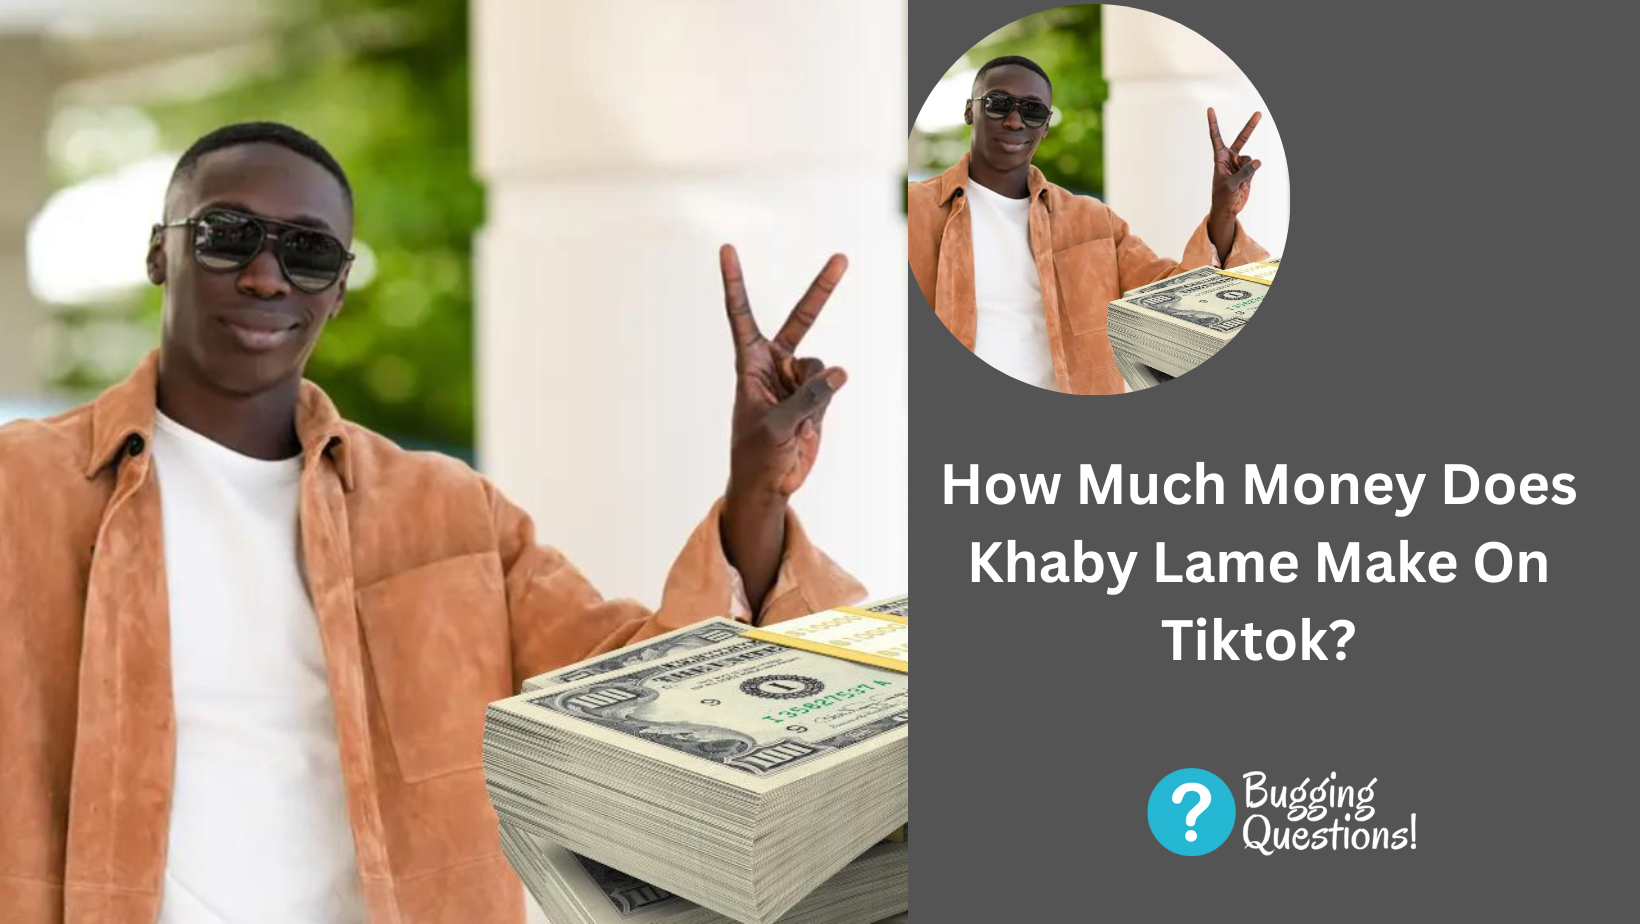 How Much Money Does Khaby Lame Make On Tiktok?